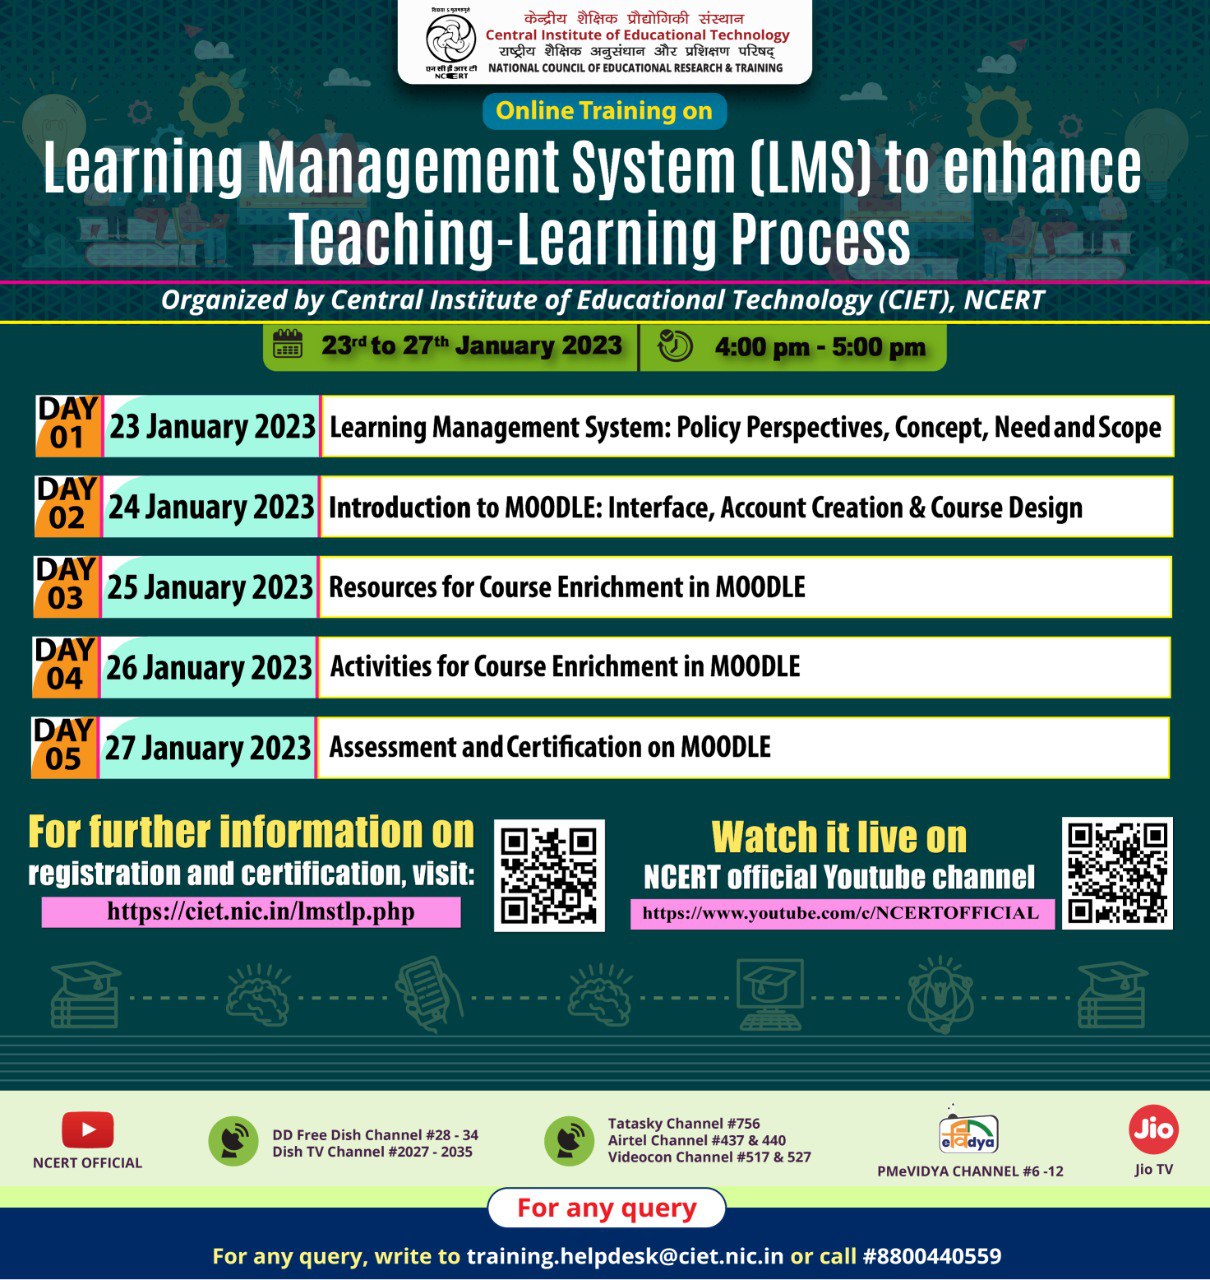 Online Training on “Learning Management System (LMS) to enhance Teaching-Learning Process” Image